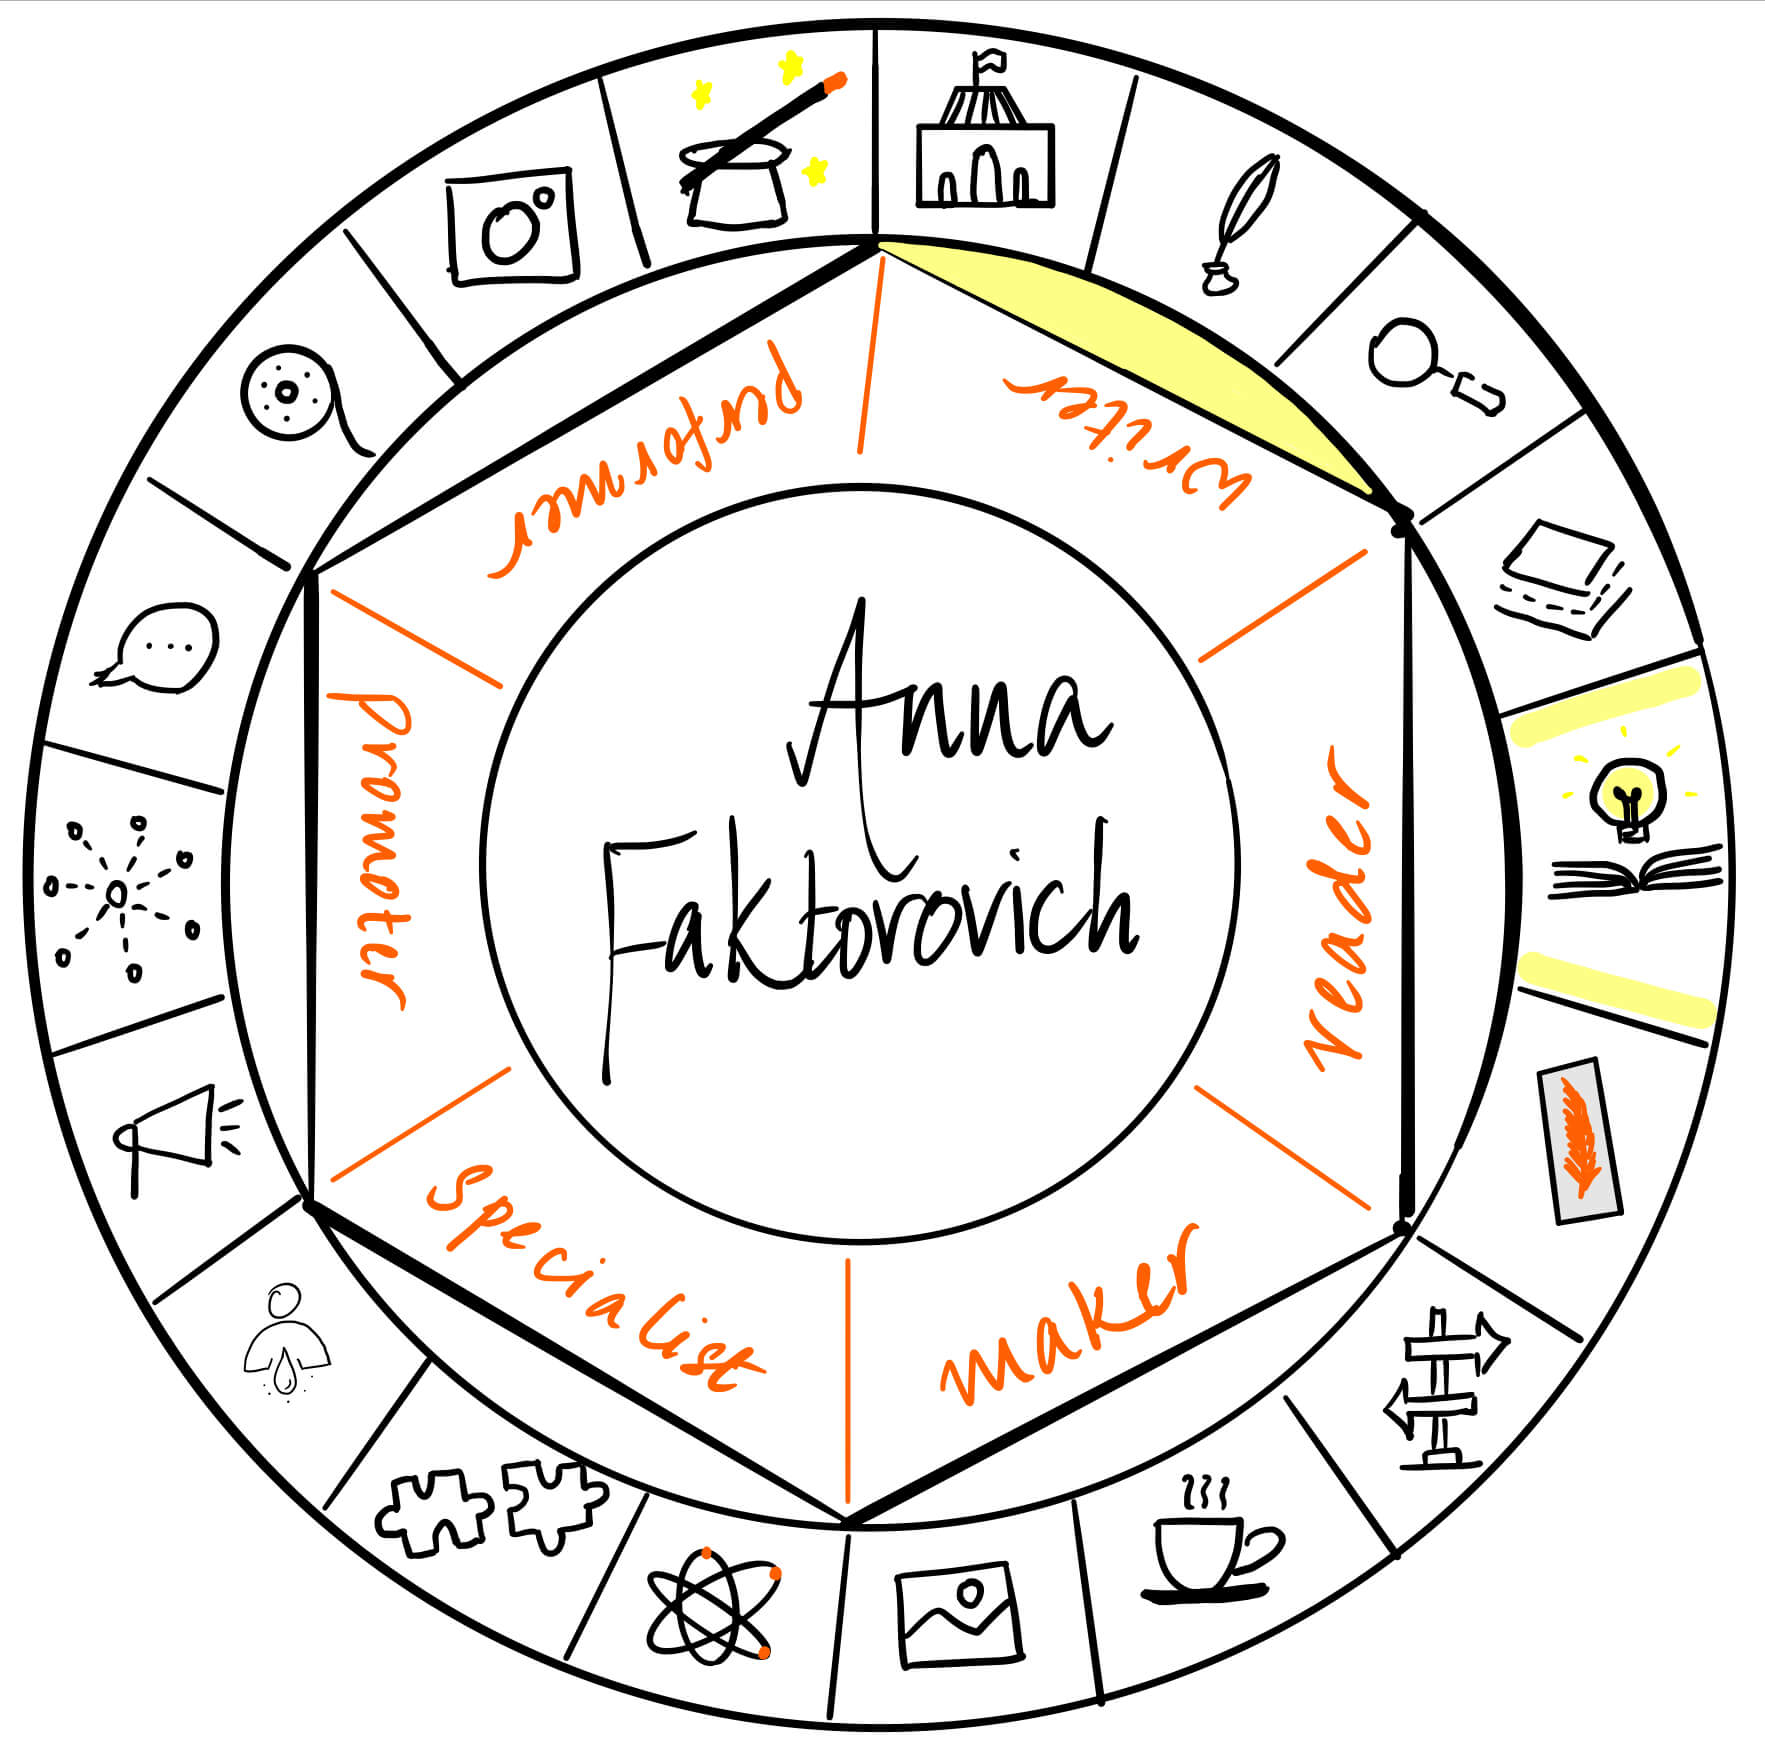 Anna Faktorovich is a writer. It's a pleasure to have her over on The Creator's Roulette to learn about some history behind Robin Hood.